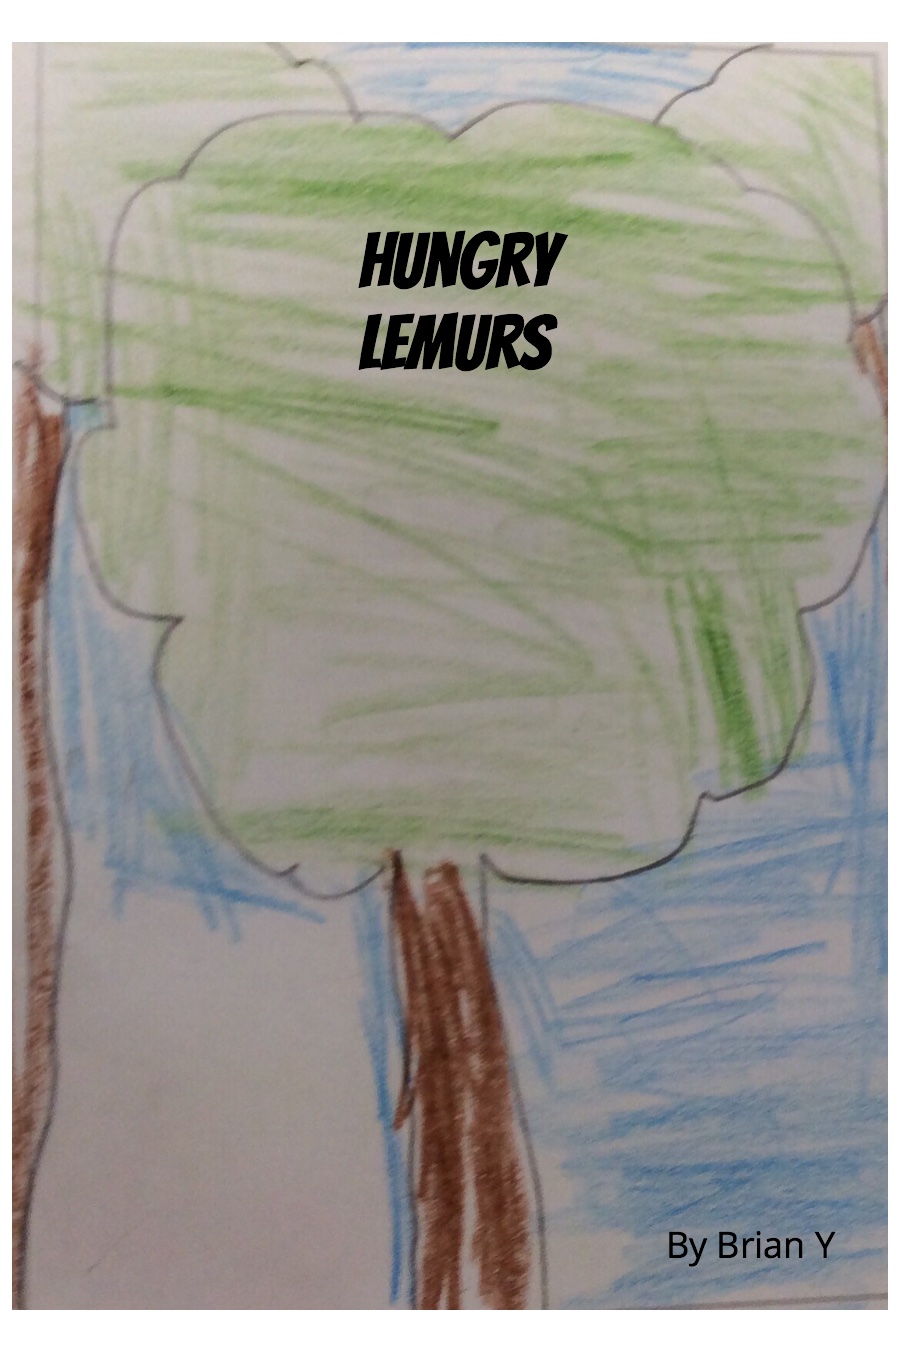 Hungry Lemurs by Brian Y